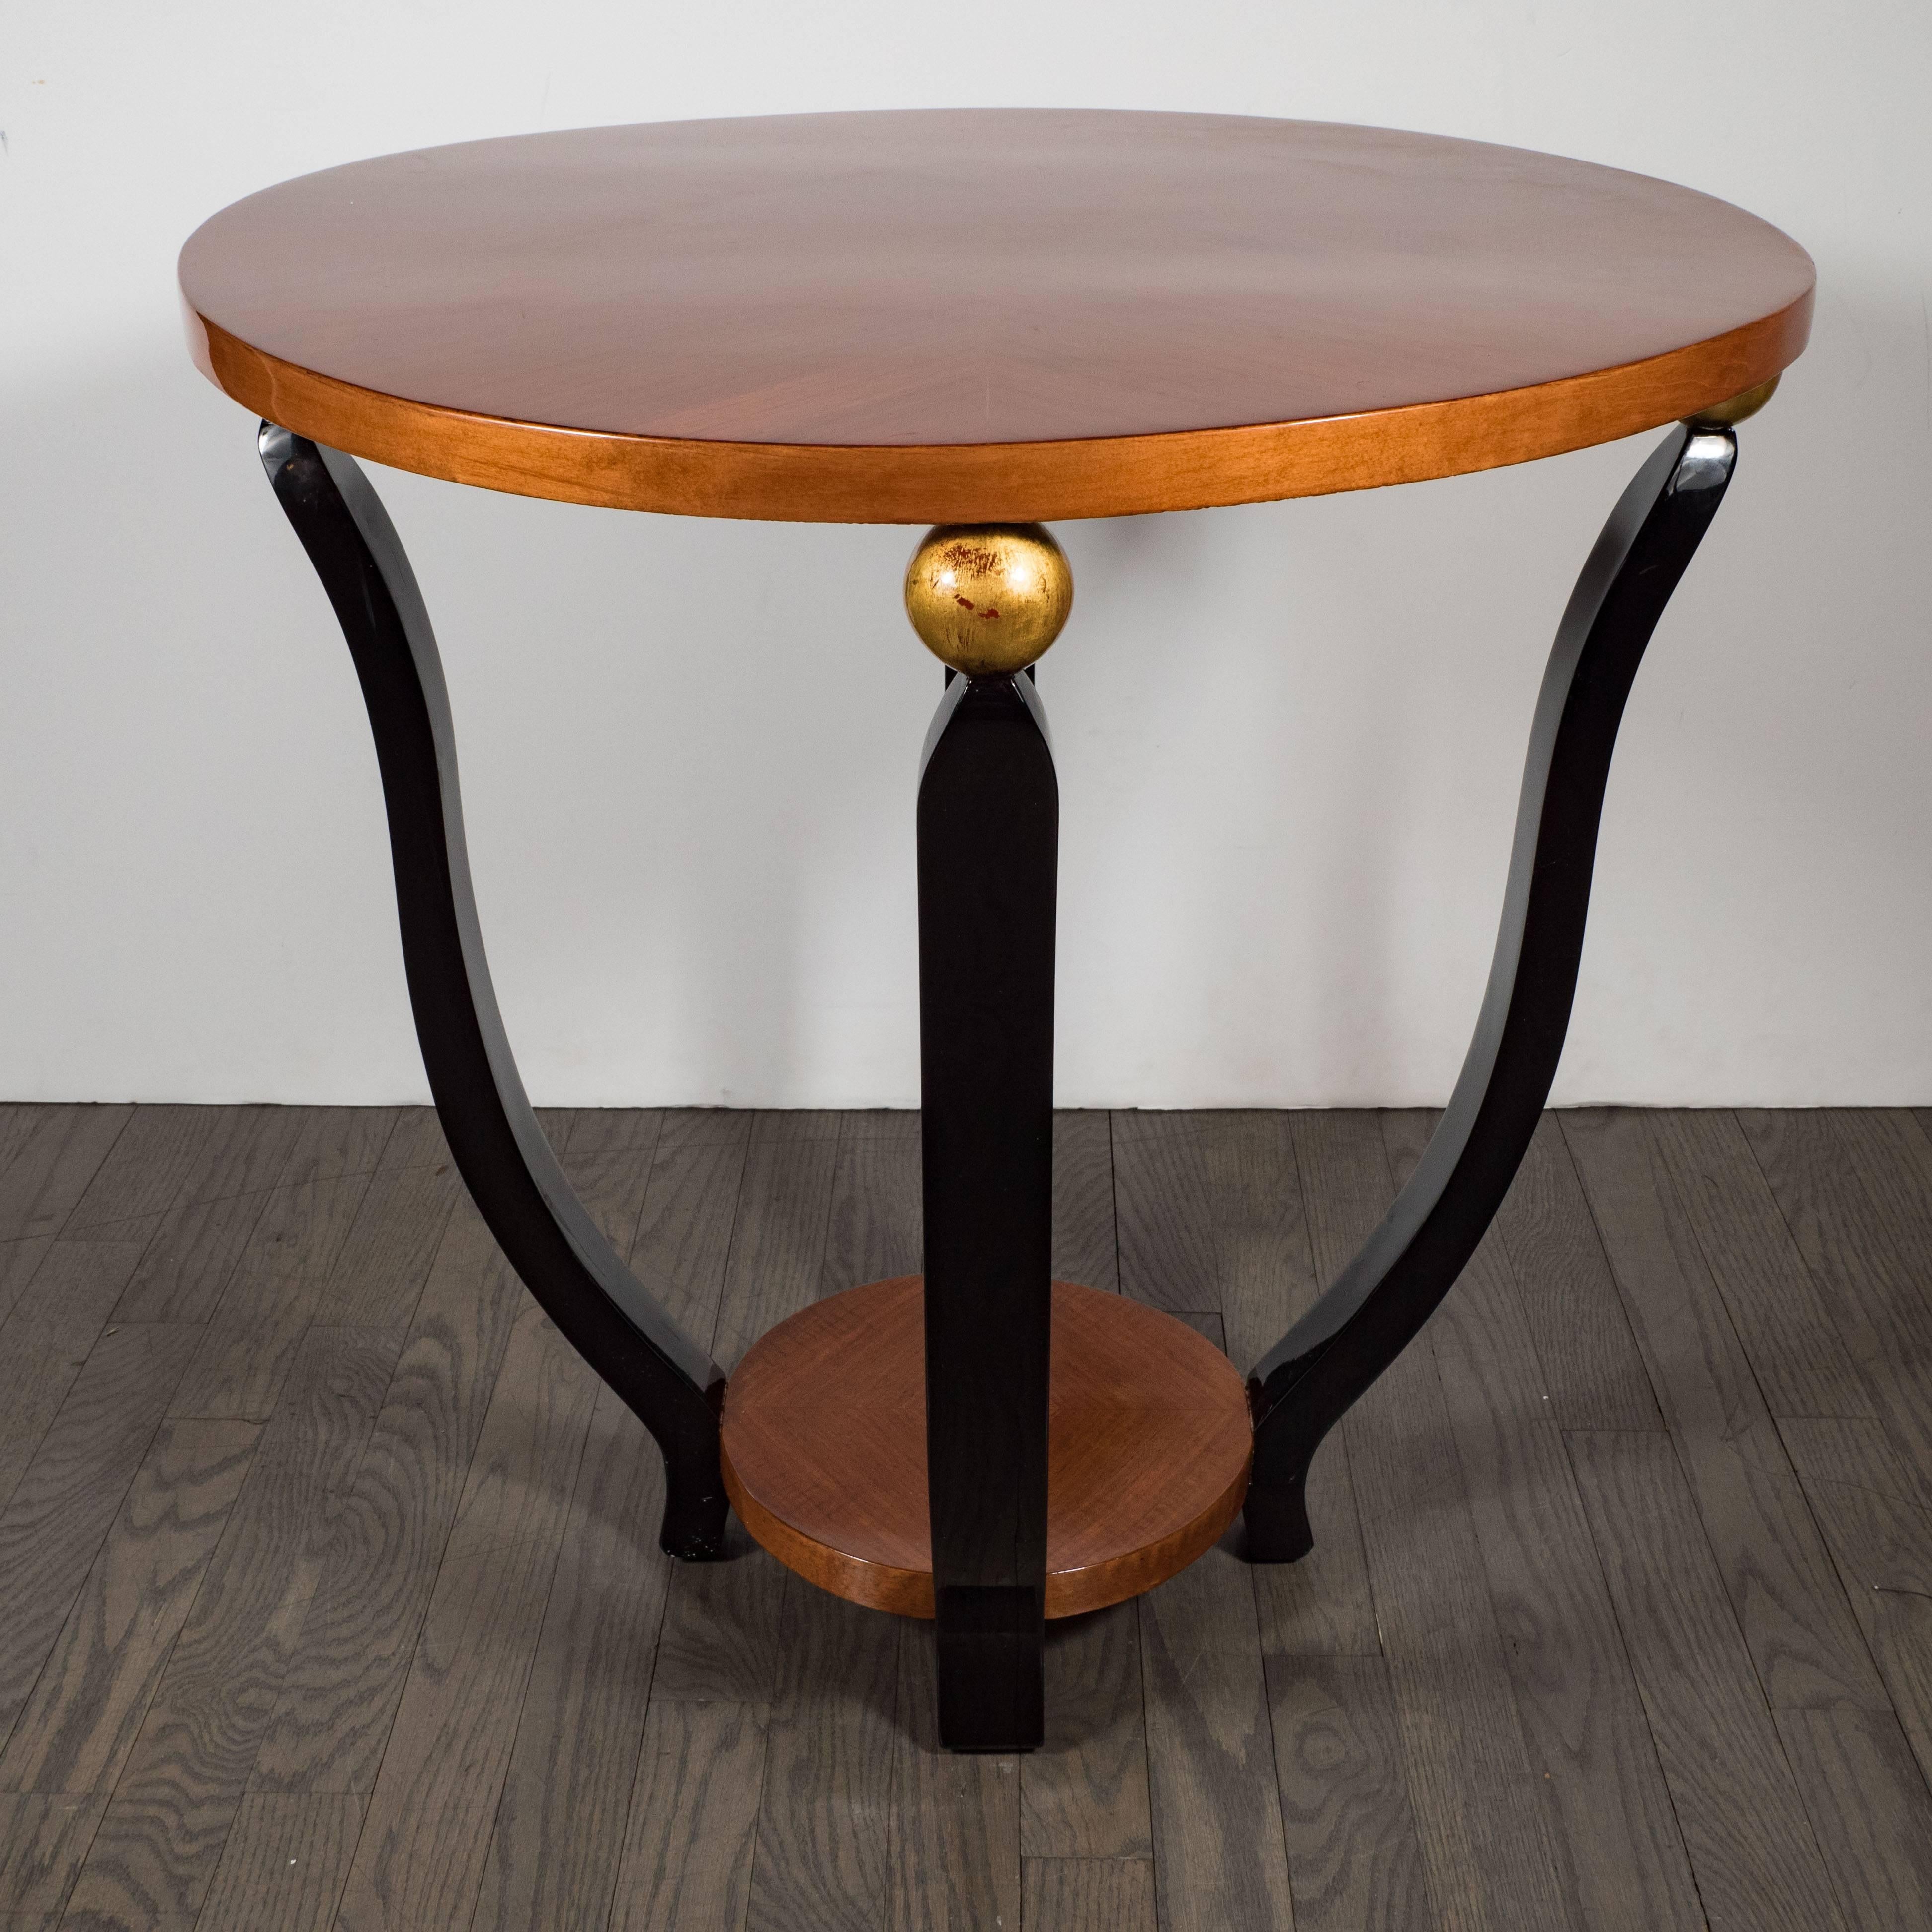 This elegant Gueridon table was realized in France, circa 1935 at the height of Art Deco. It features two circular tiers composed of bookmatched walnut connected by undulating supports finished in black lacquer that culminate in a orbital